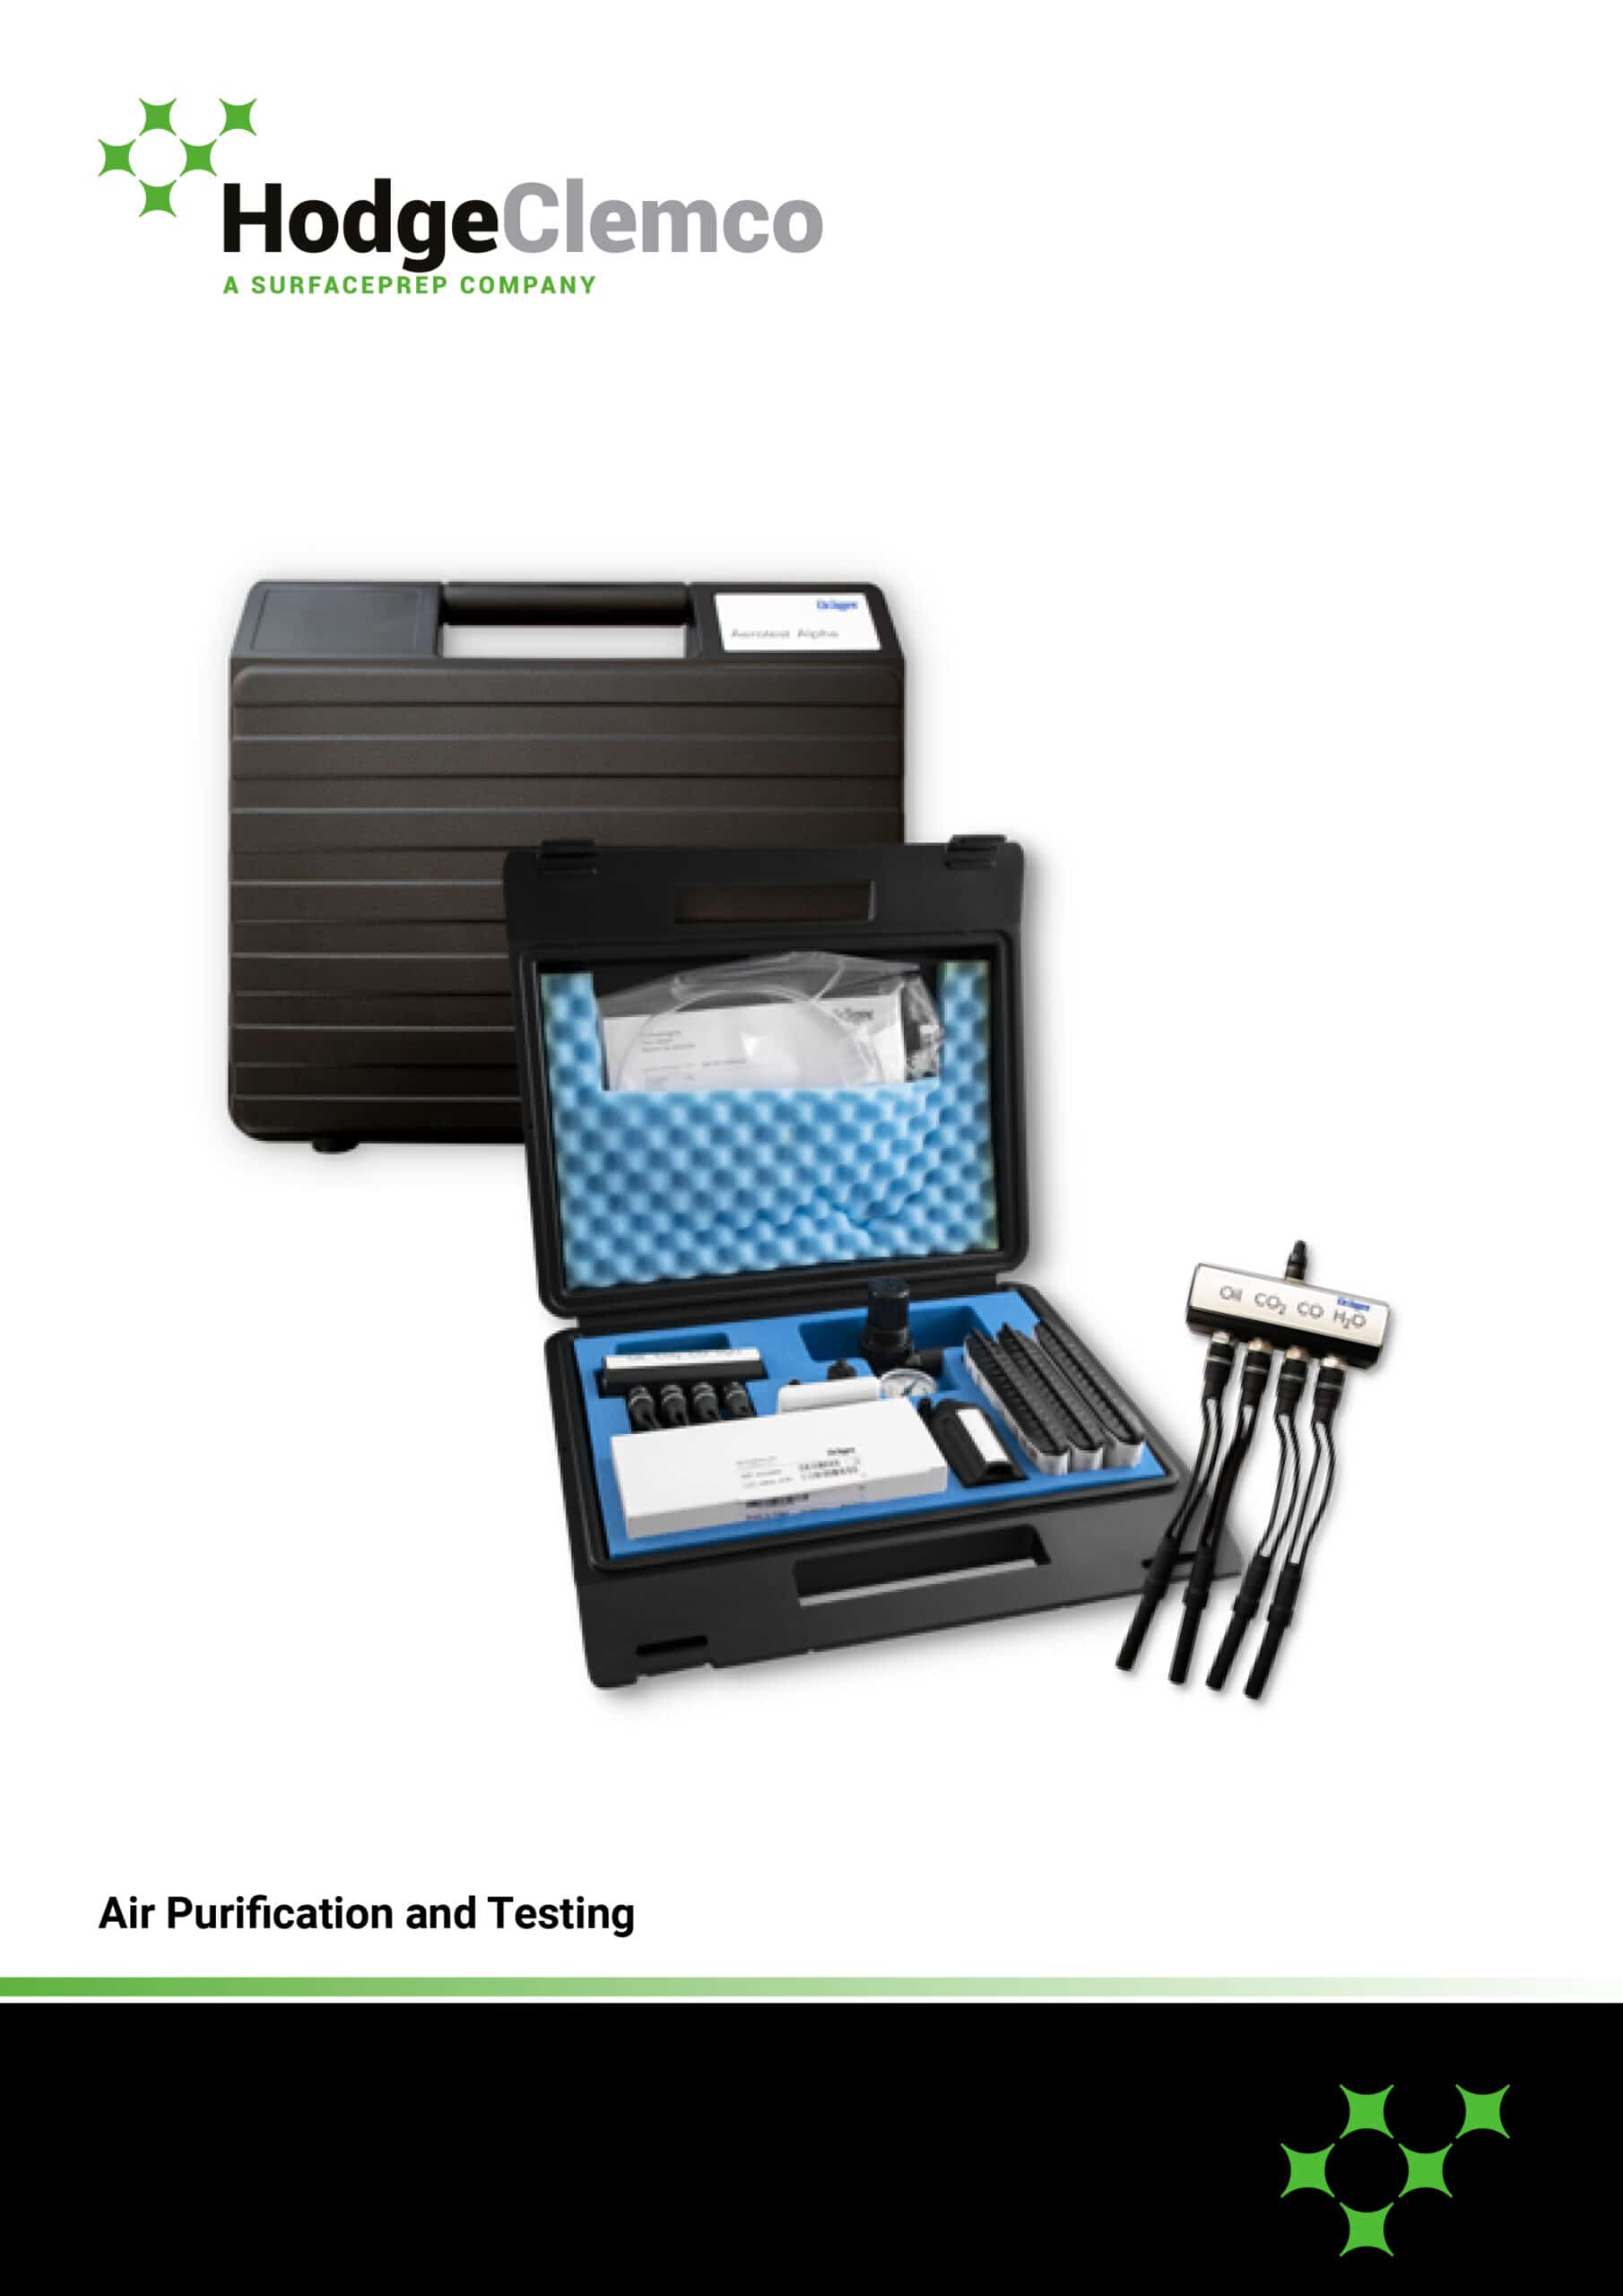 Air Purification and testing cover